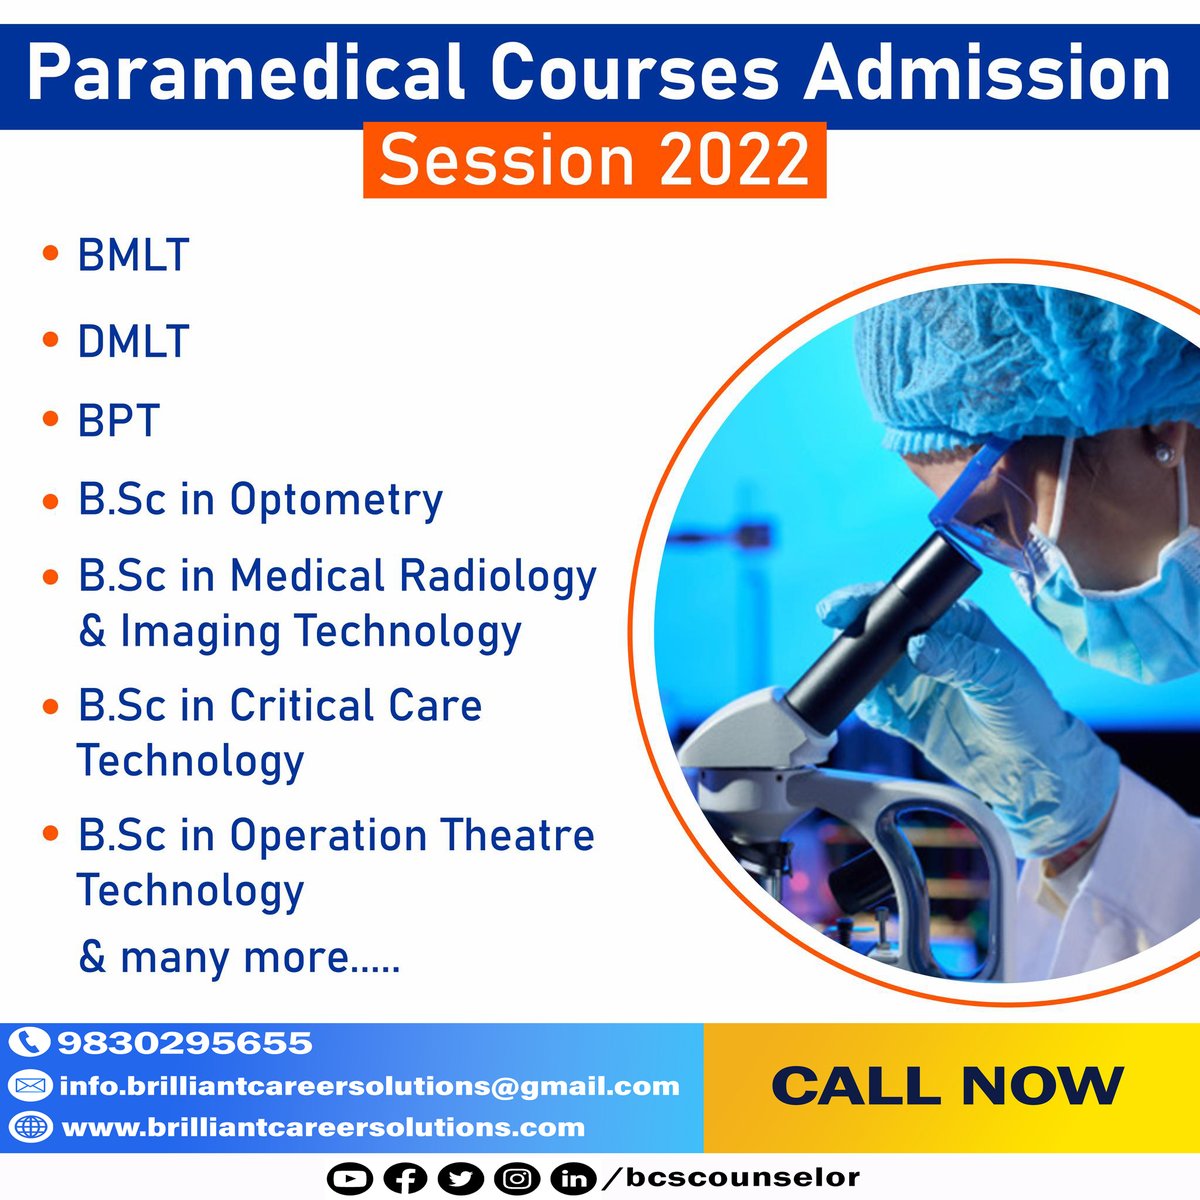 Paramedical Courses Admission 2022 in West Bengal
Course -DMLT, BMLT, BPT, B.Sc.
Call/WhatsApp :+91-9830295655
.
#paramedicalcourses #dmlt #bmlt #bpt #optometry #criticalcaretechnology #operationtheatretechnology #mpt #physiotherapist #brilliantcareersolutions